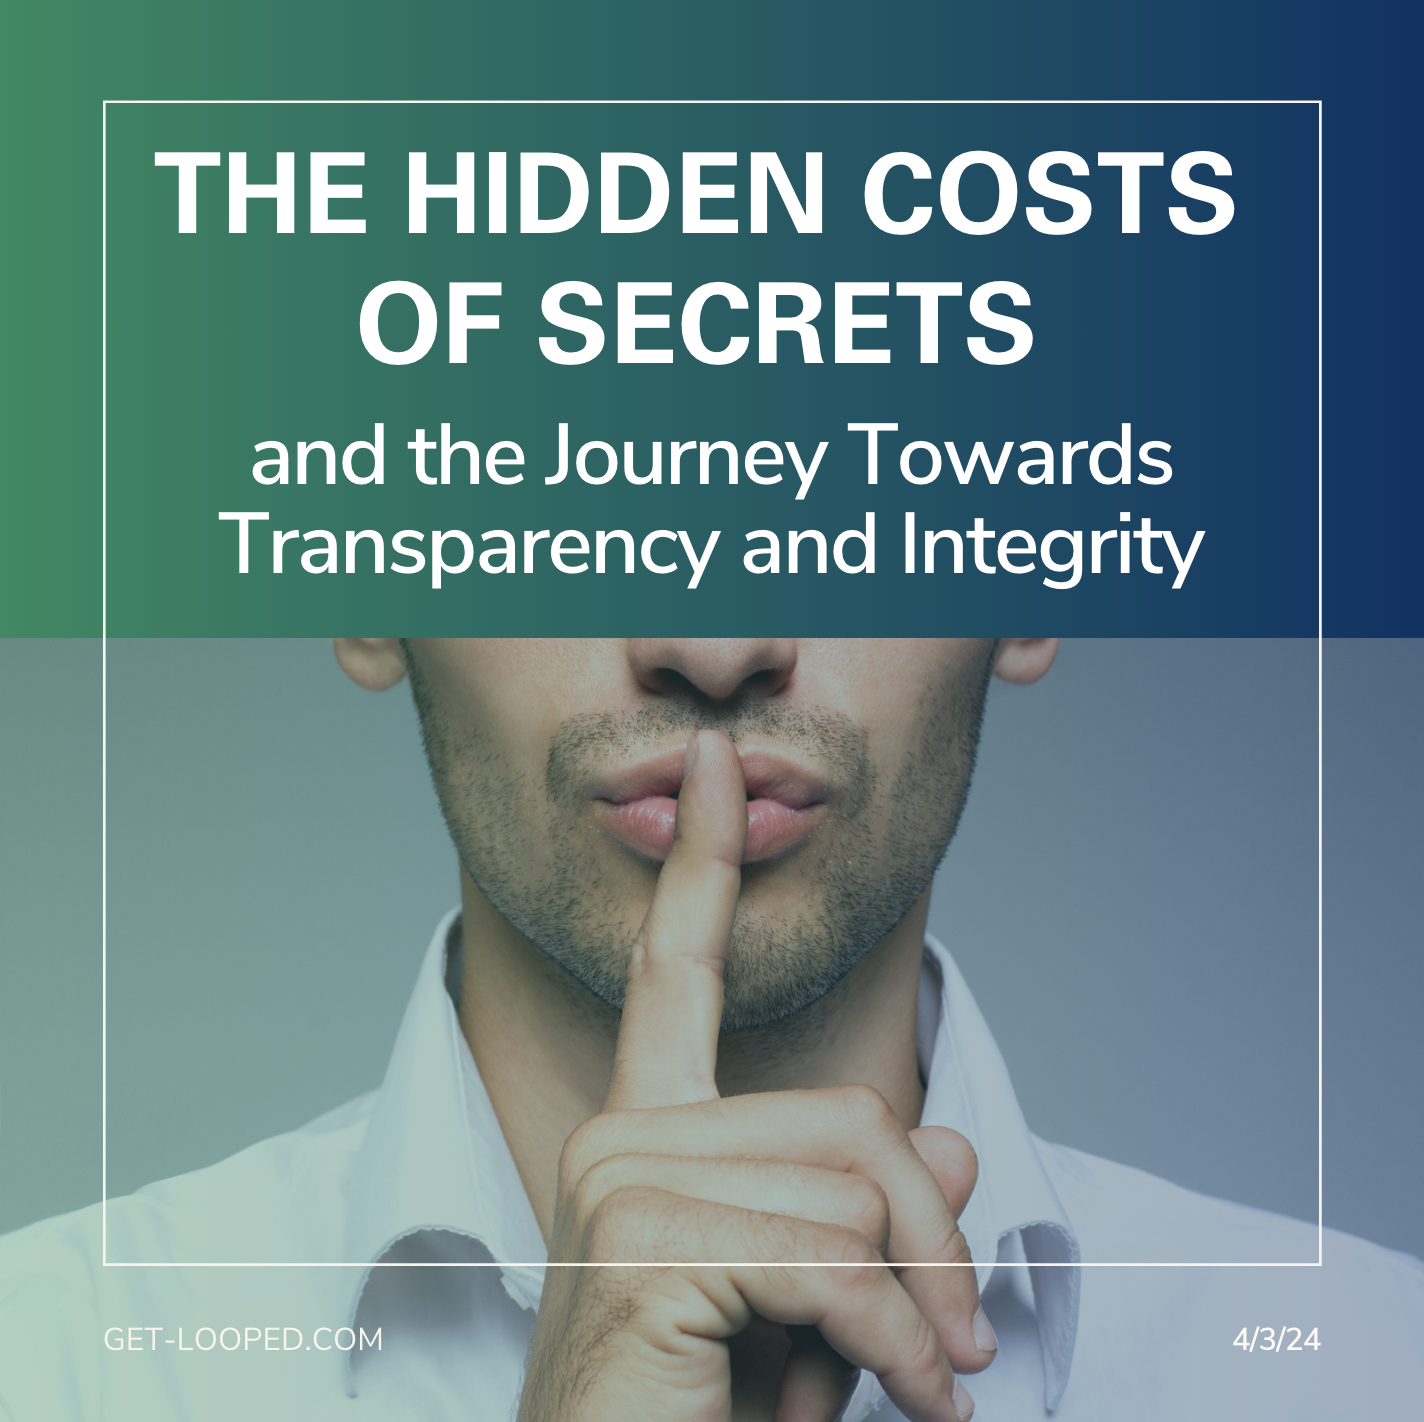 The Hidden Costs of Secrets and the Journey Towards Transparency and Integrity in your small business